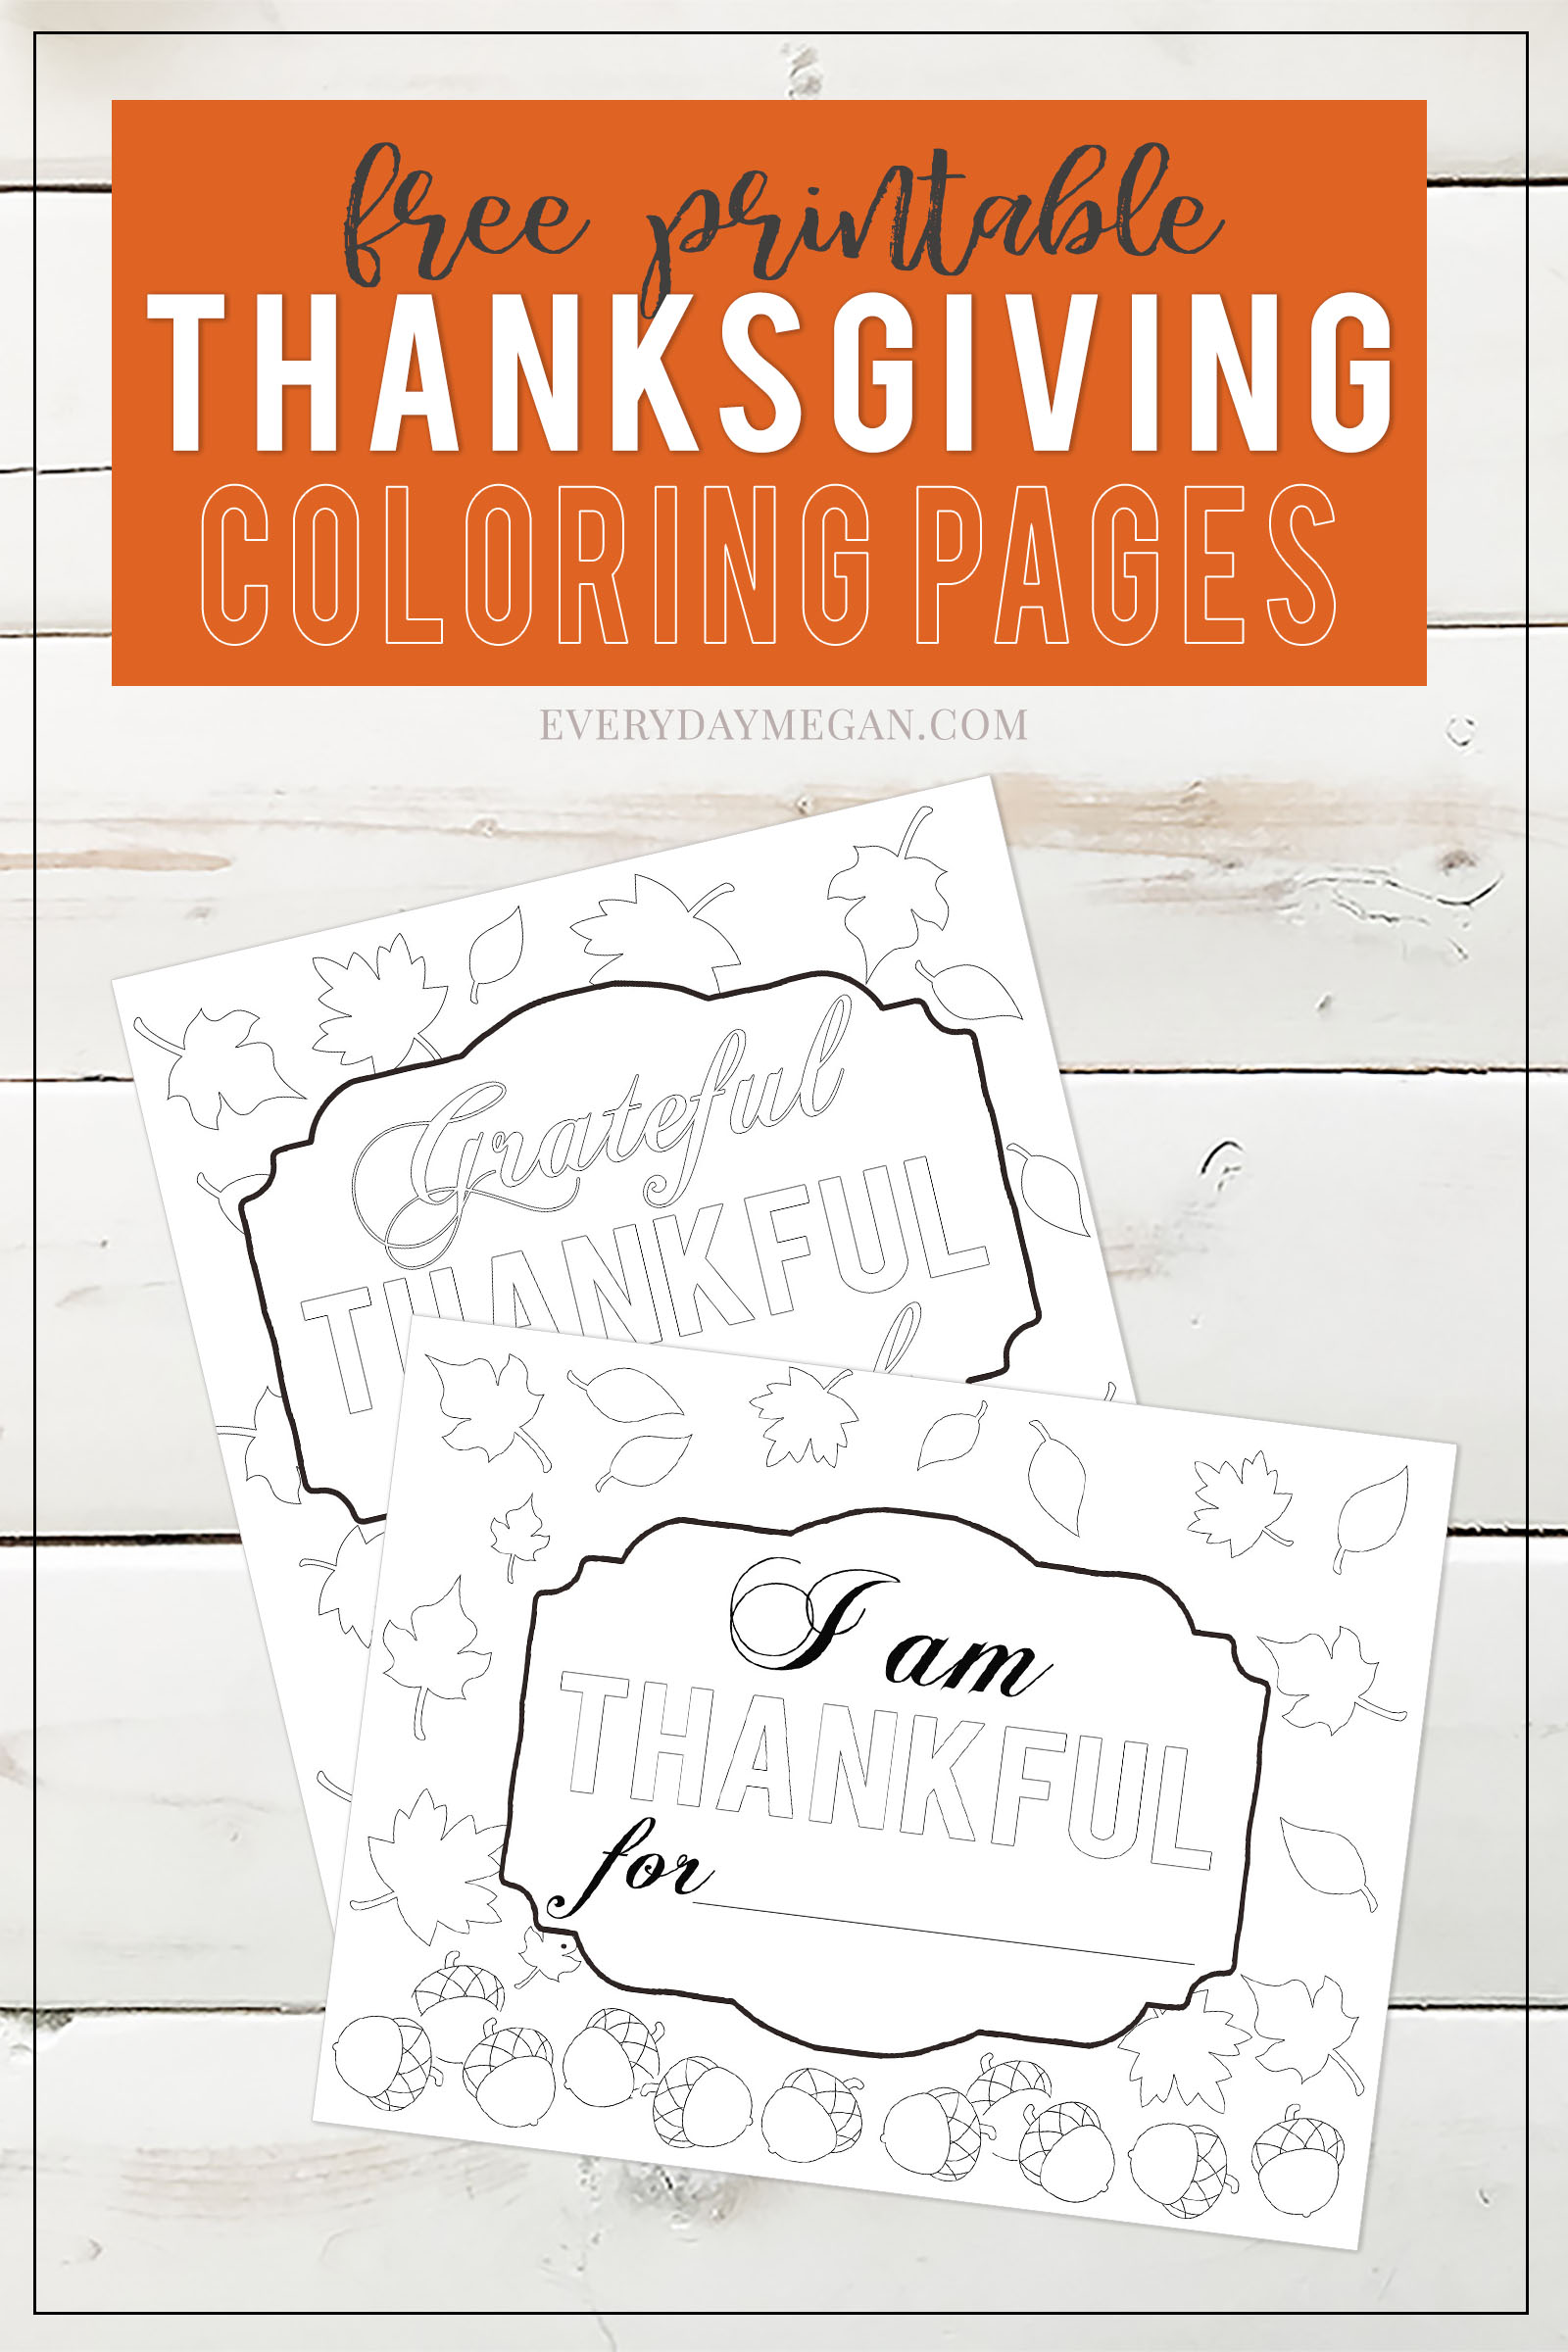 free-printable-thanksgiving-coloring-pages-everyday-megan